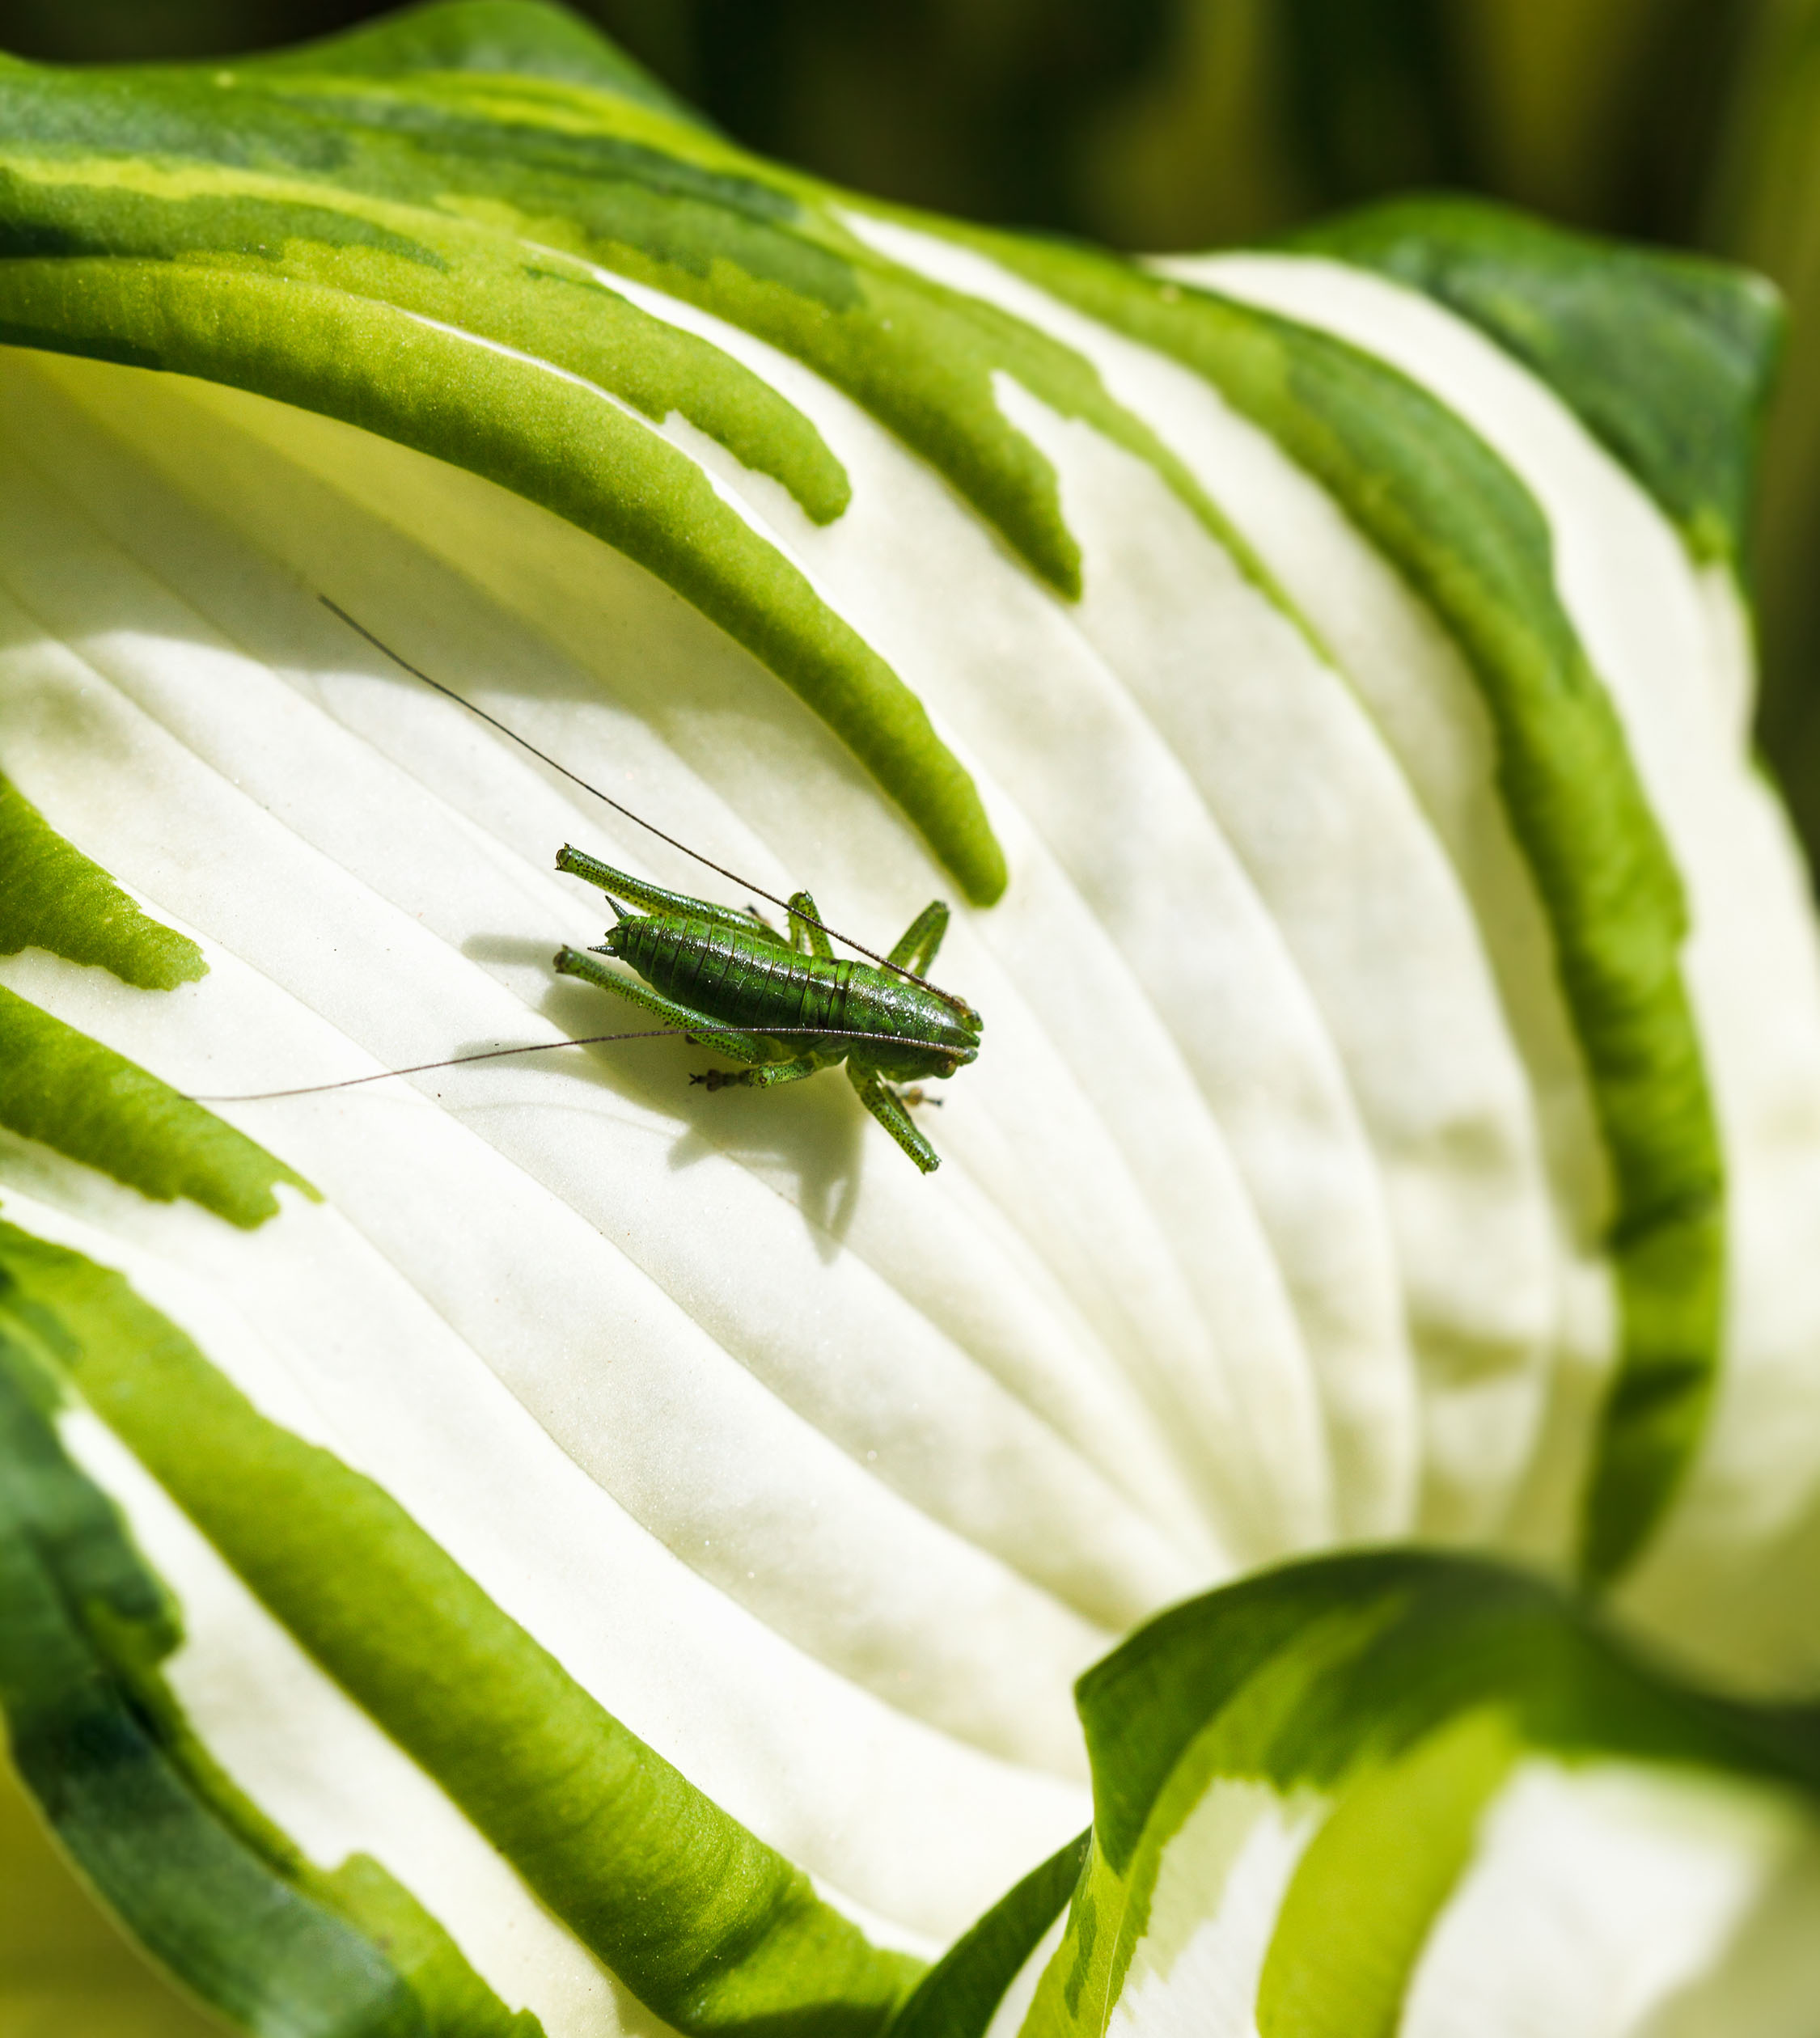 A single green grasshopper perched in the middle of a green-and-white hosta leaf.